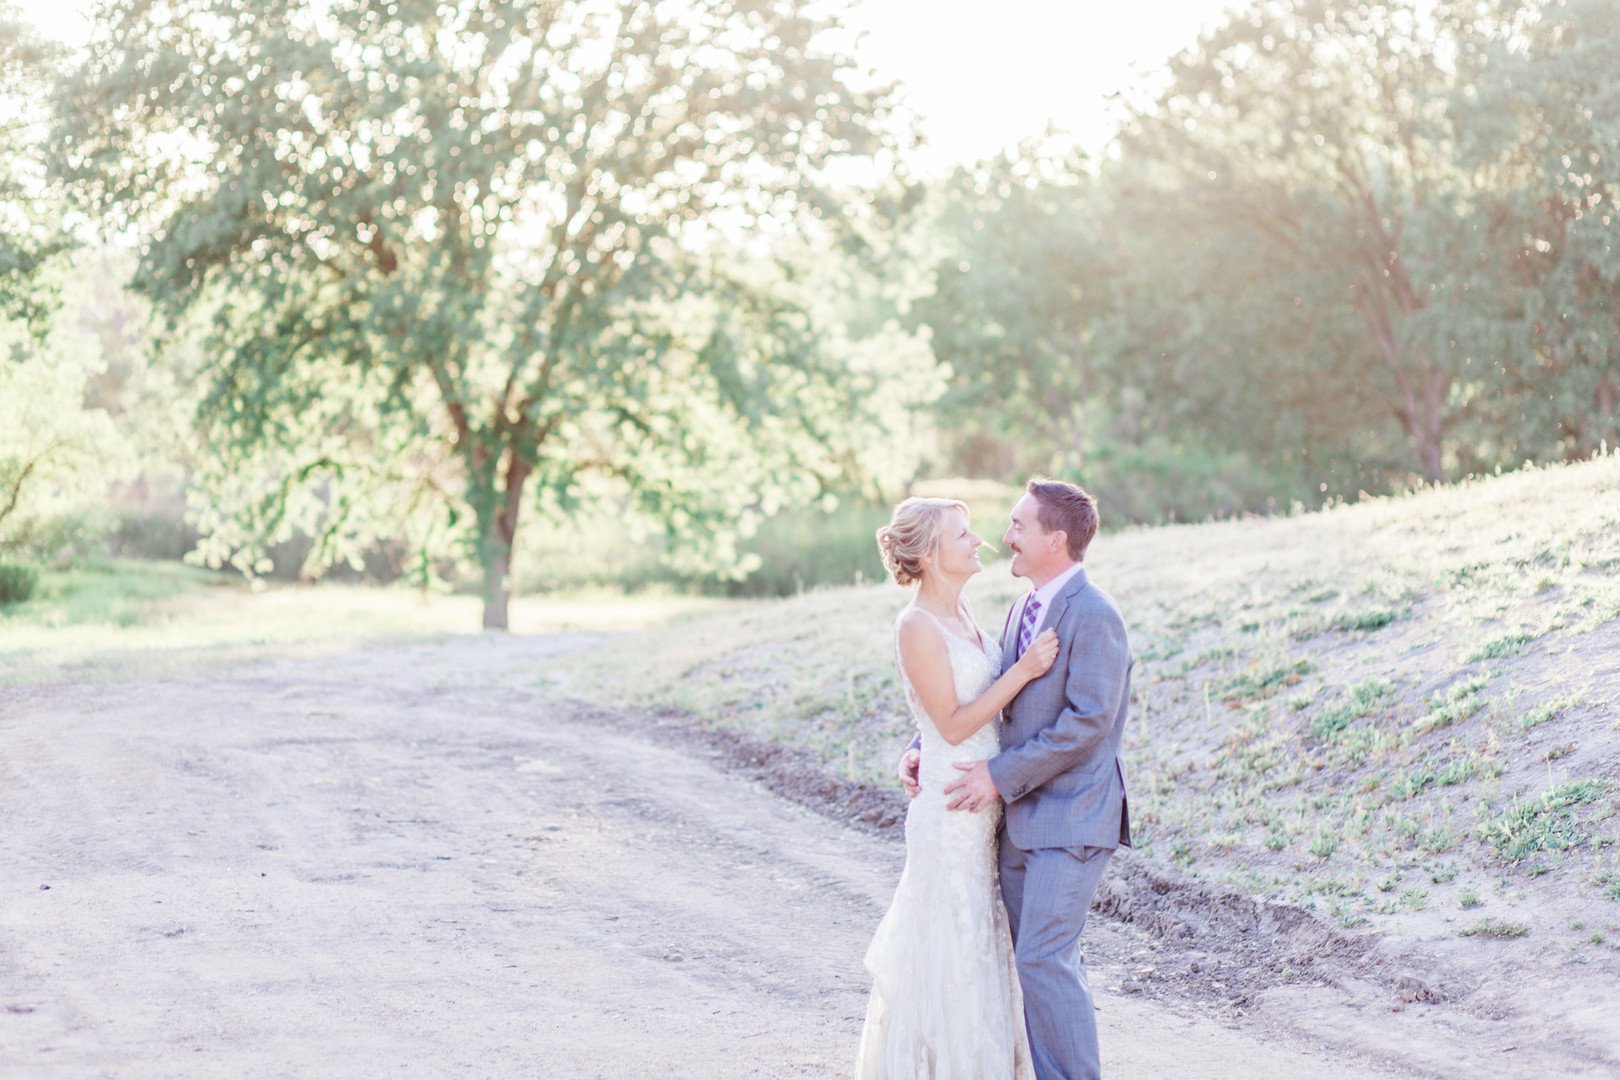 www.santabarbarawedding.com | Kay Mitchell | The Carriage House | Effortless Events | Bride and Groom